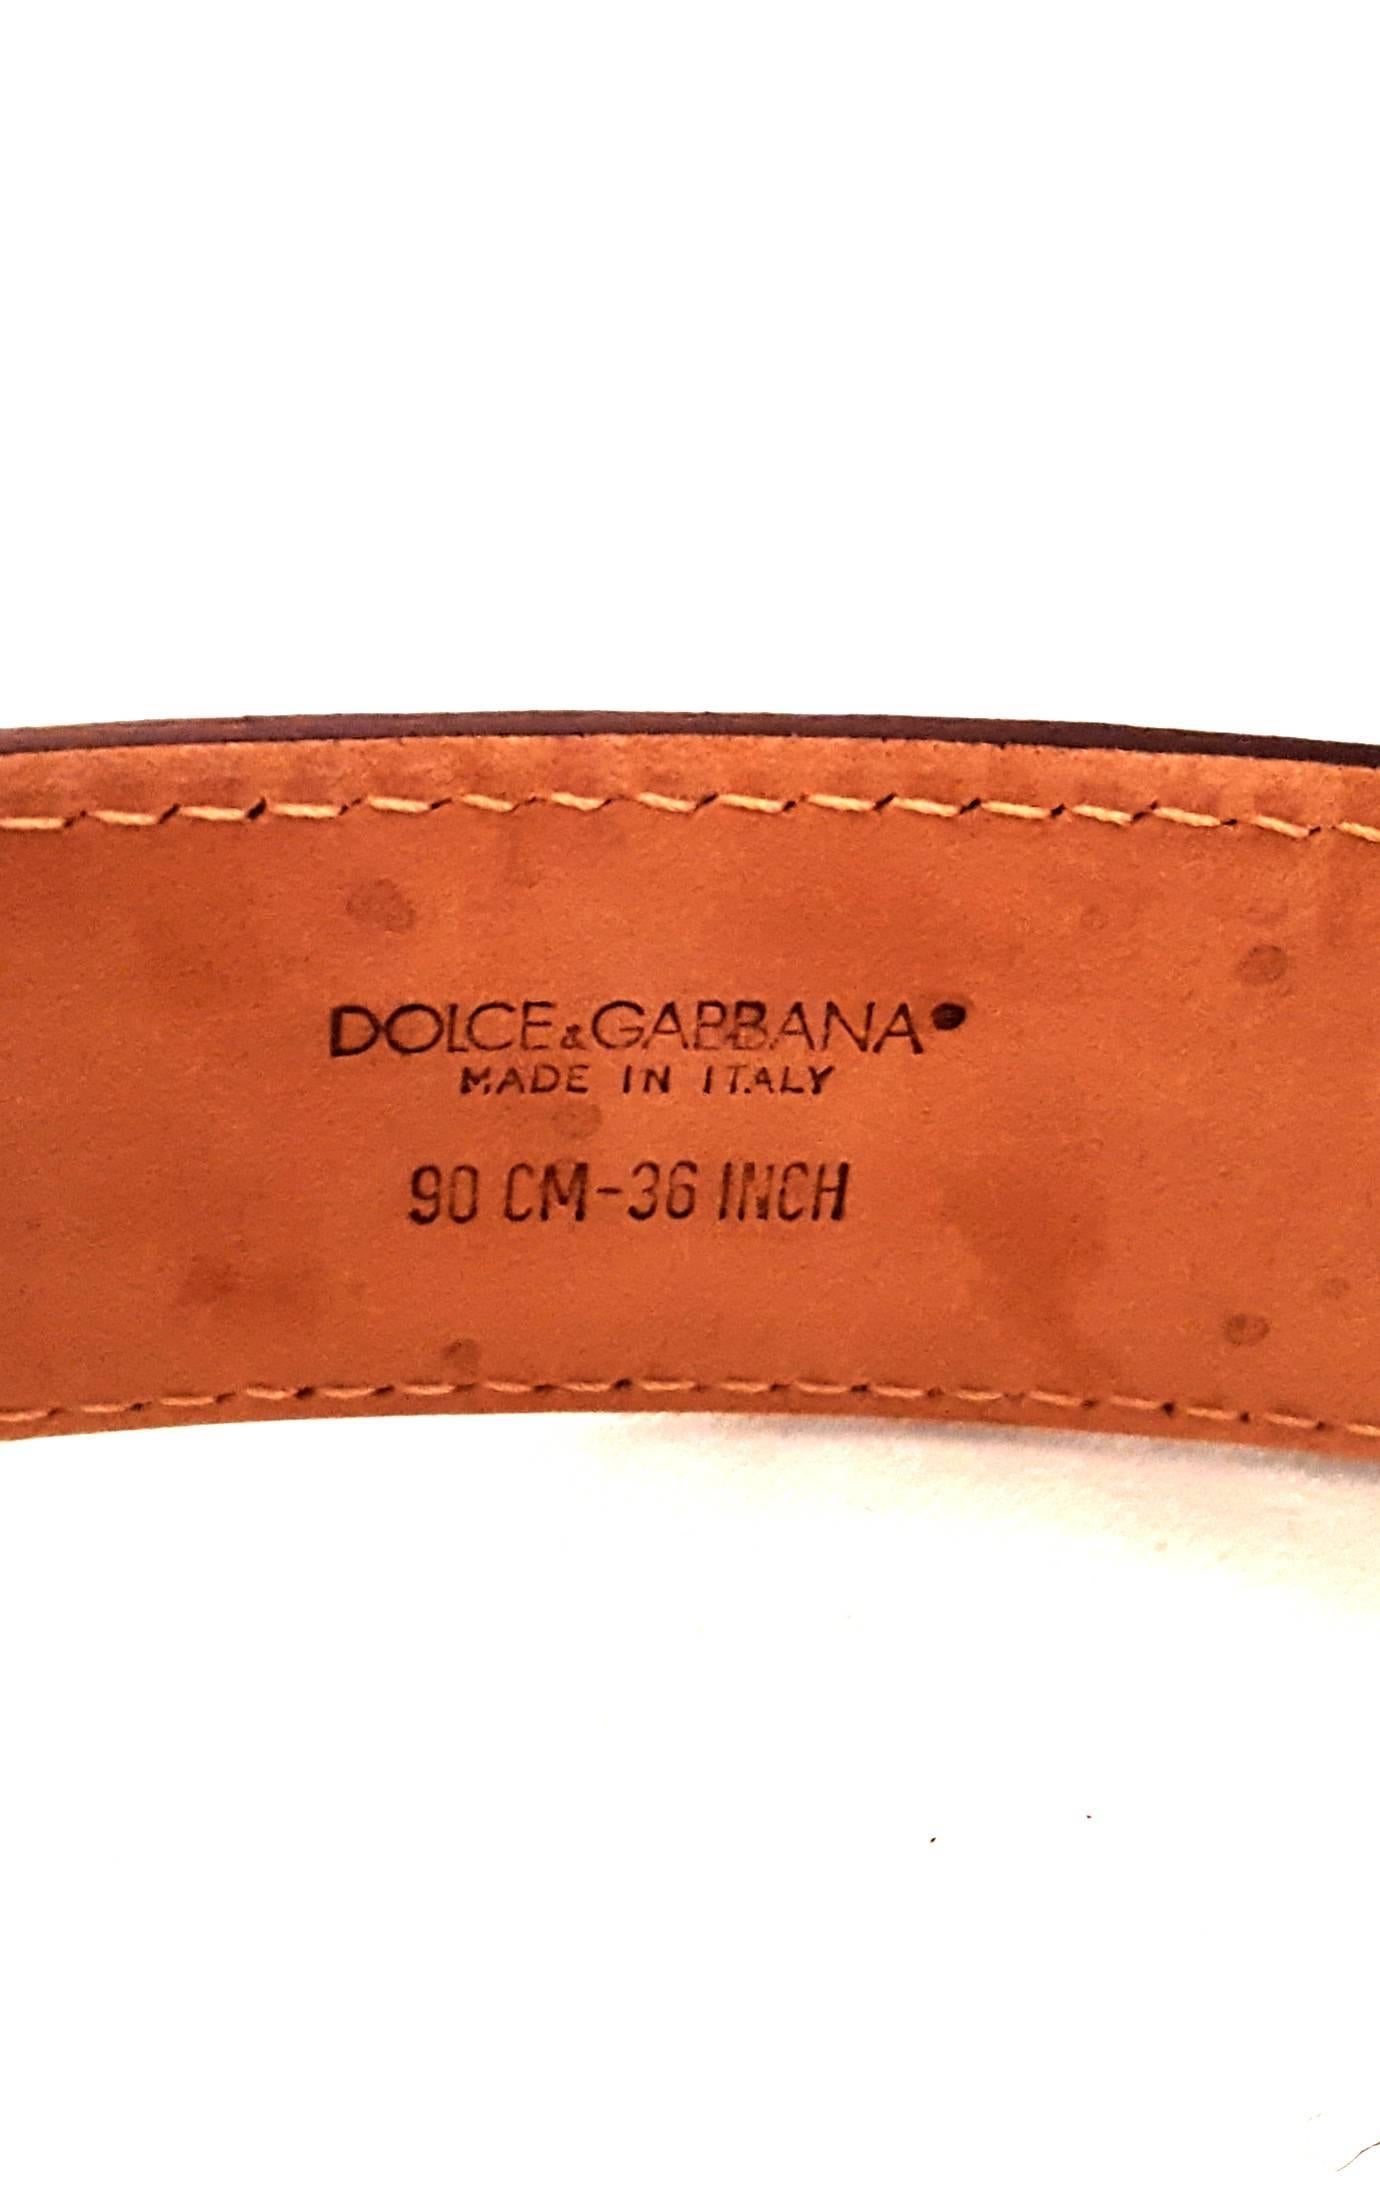 Dolce & Gabbana’s luxurious leather belts are crafted in Italy from the finest artisan techniques.  This black pebbled leather belt with bold D & G silver tone metal logo and silver tone buckle echoes the designs that Dolce & Gabbana have inspired